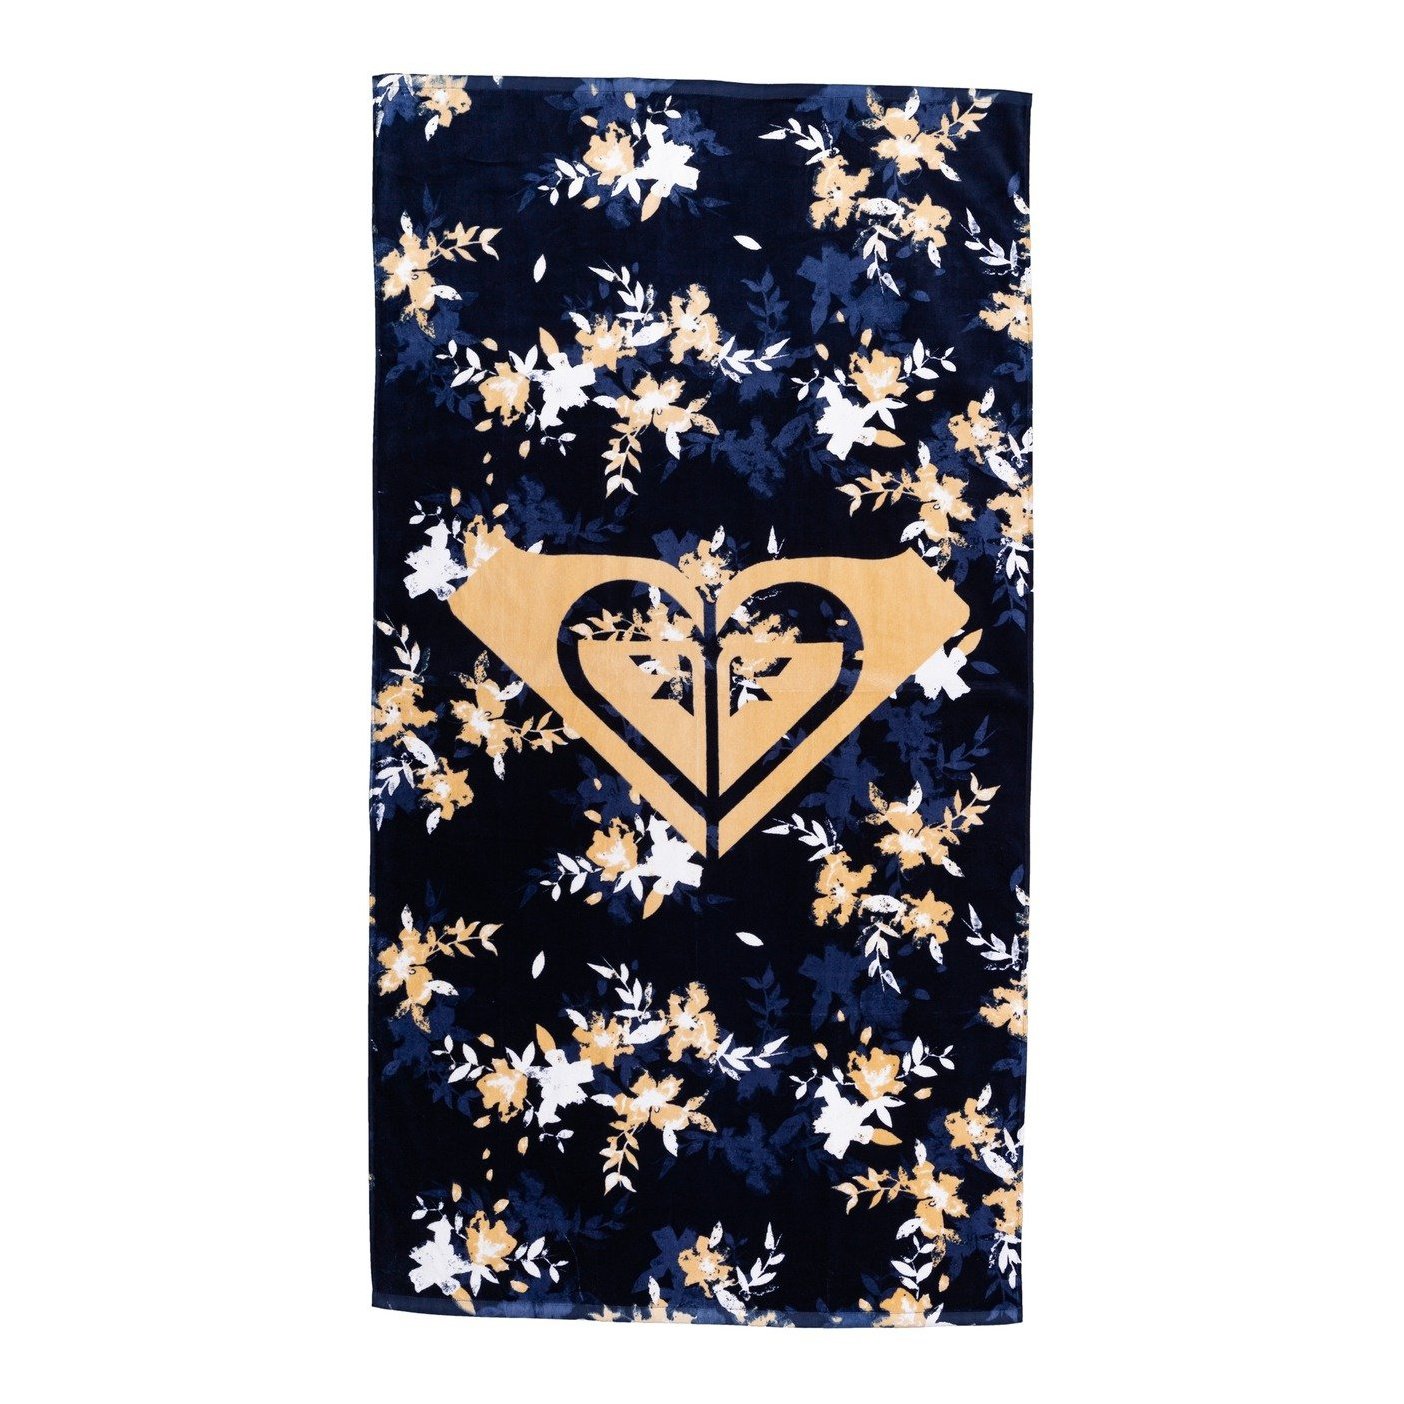 Glimmer Of Hope - Beach Towel - Sporty Pro